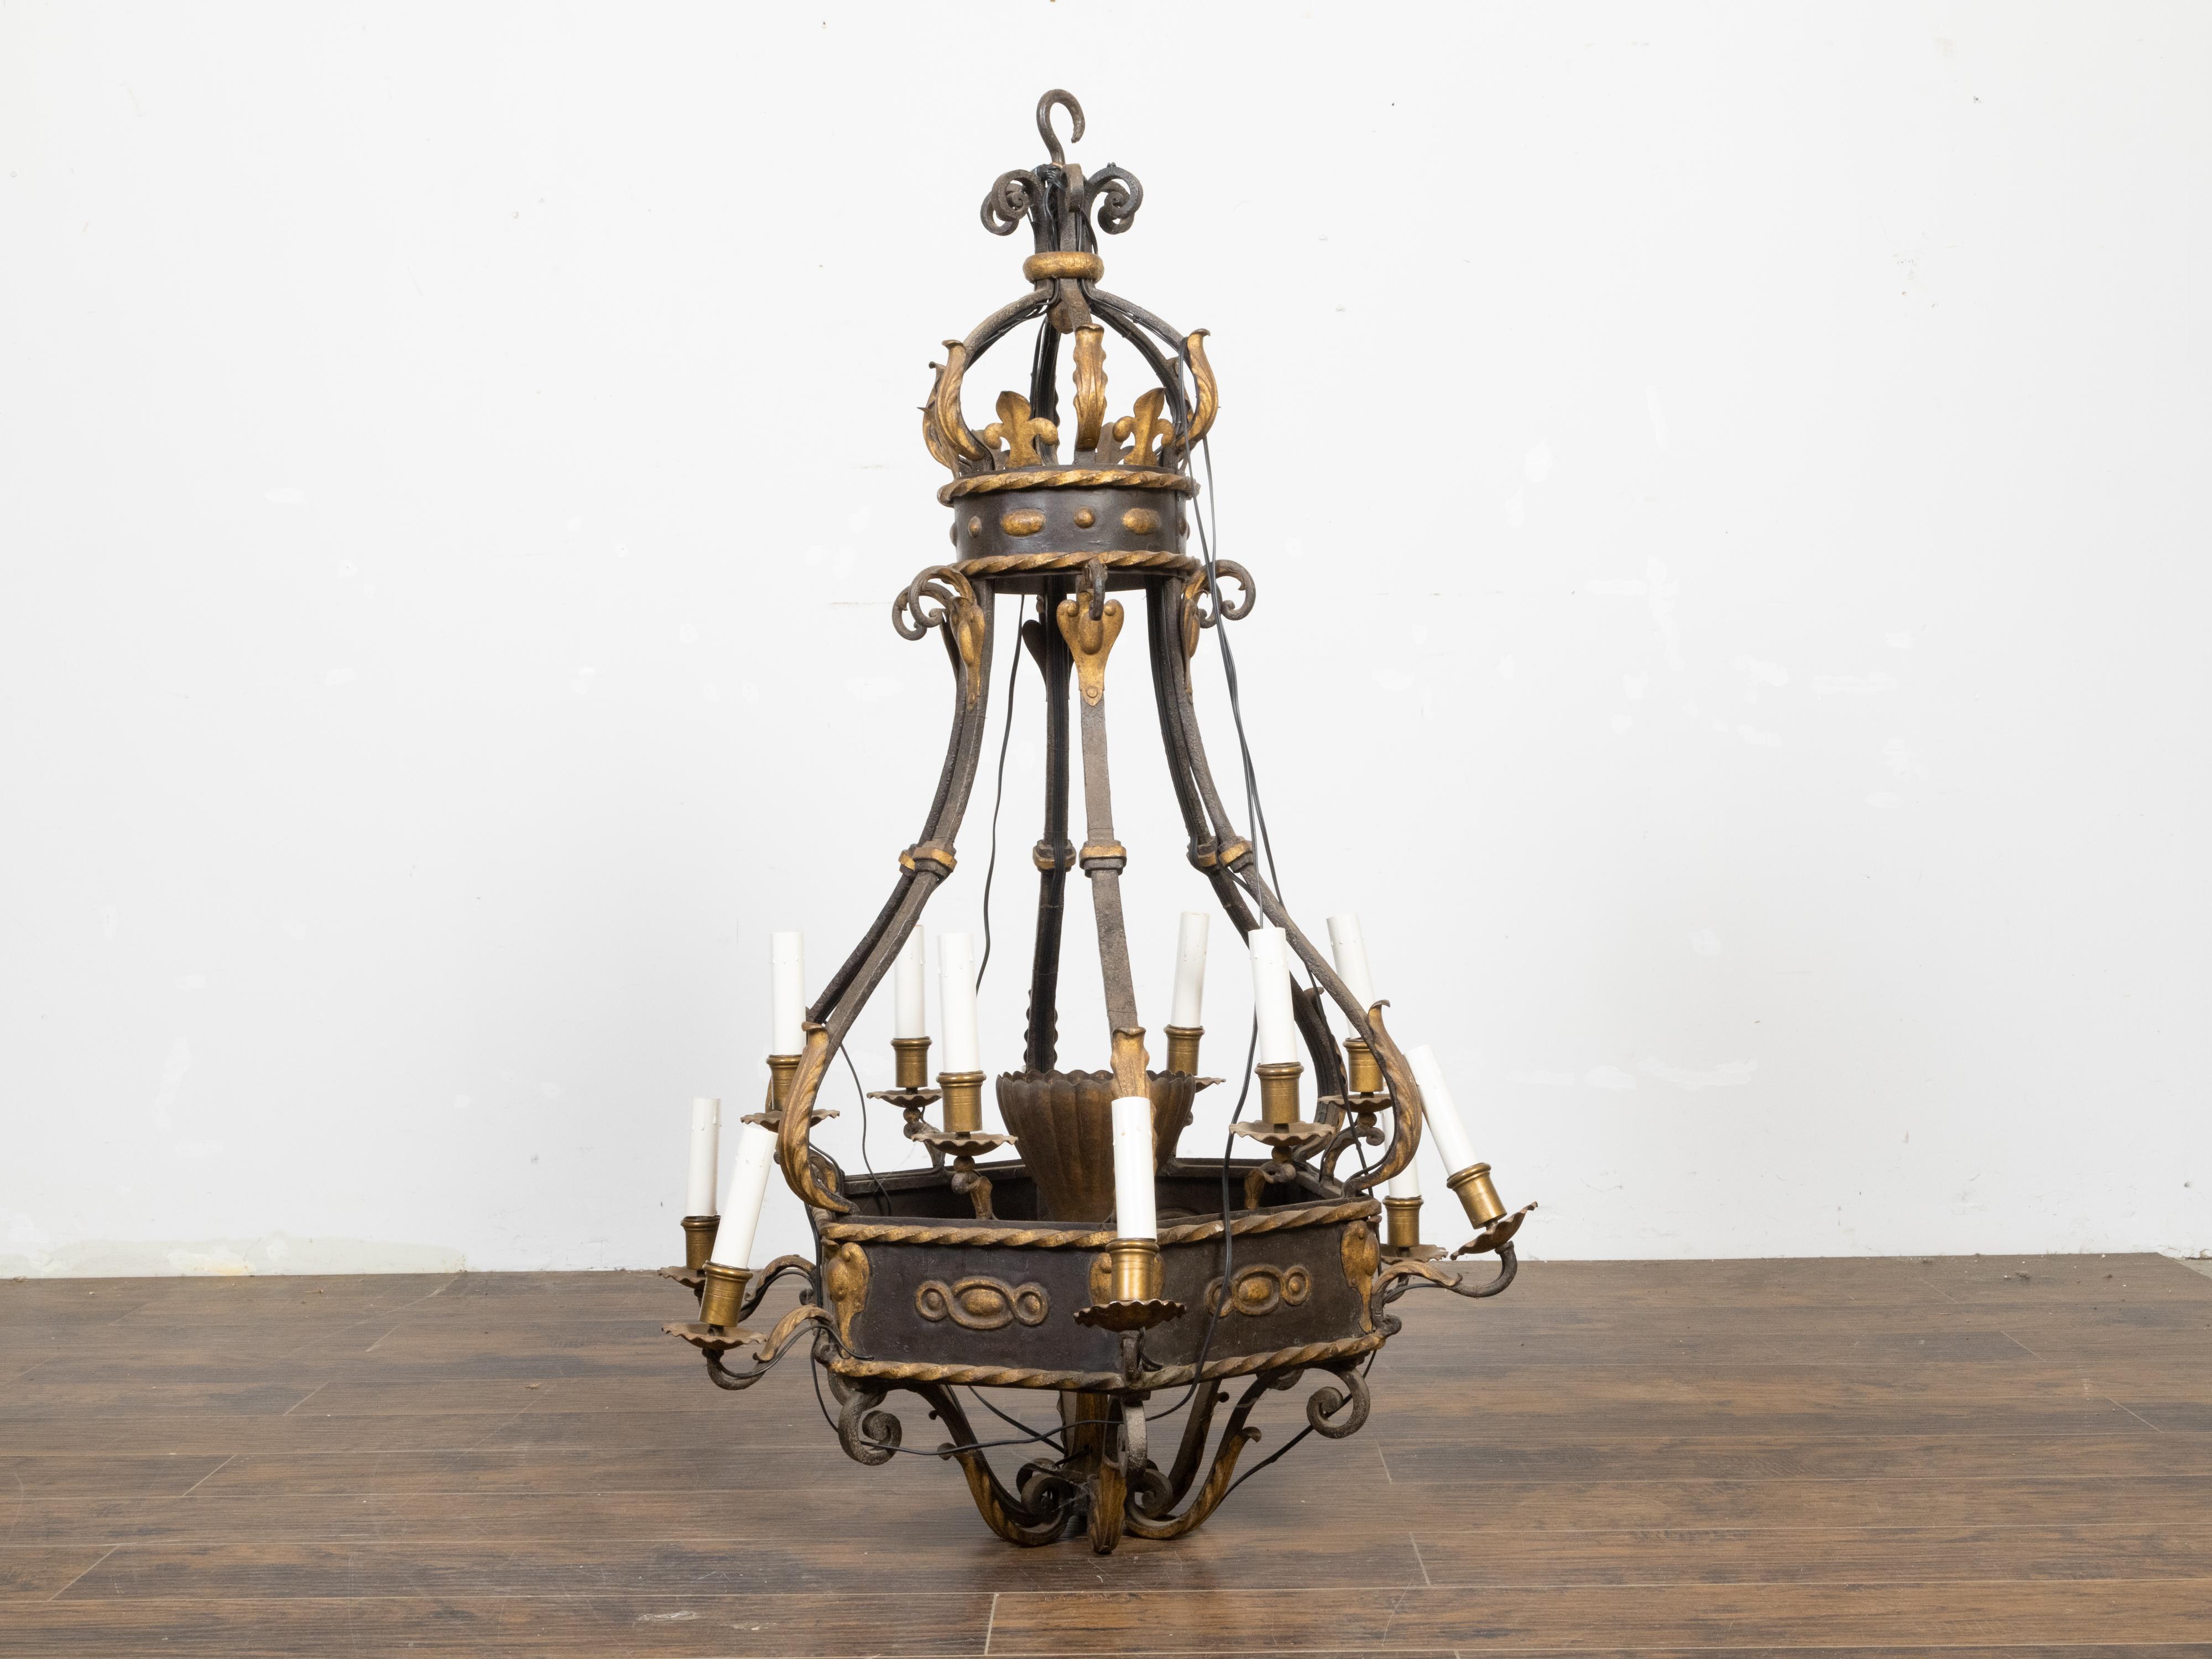 A French metal 12-light crown chandelier from the 19th century with gilded accents. Illuminate your home with the grandeur of 19th-century French elegance embodied in this exquisite metal 12-light crown chandelier. Adorned with gilded accents, this